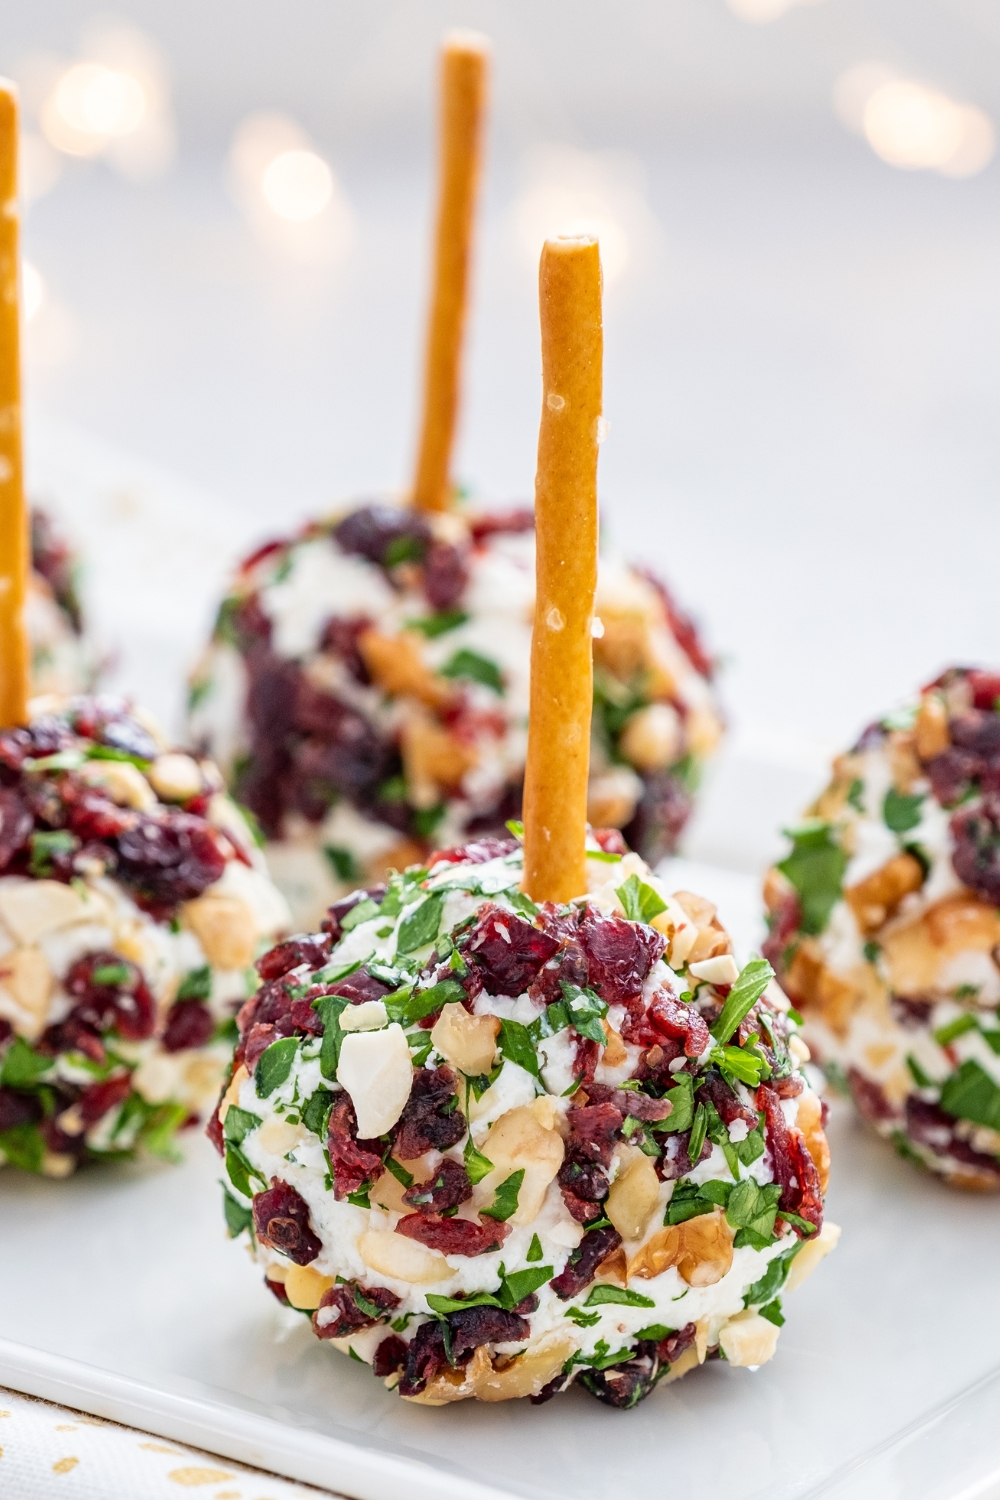 Plate of appetizing Christmas cheese balls made of cranberries, pecan and herbs